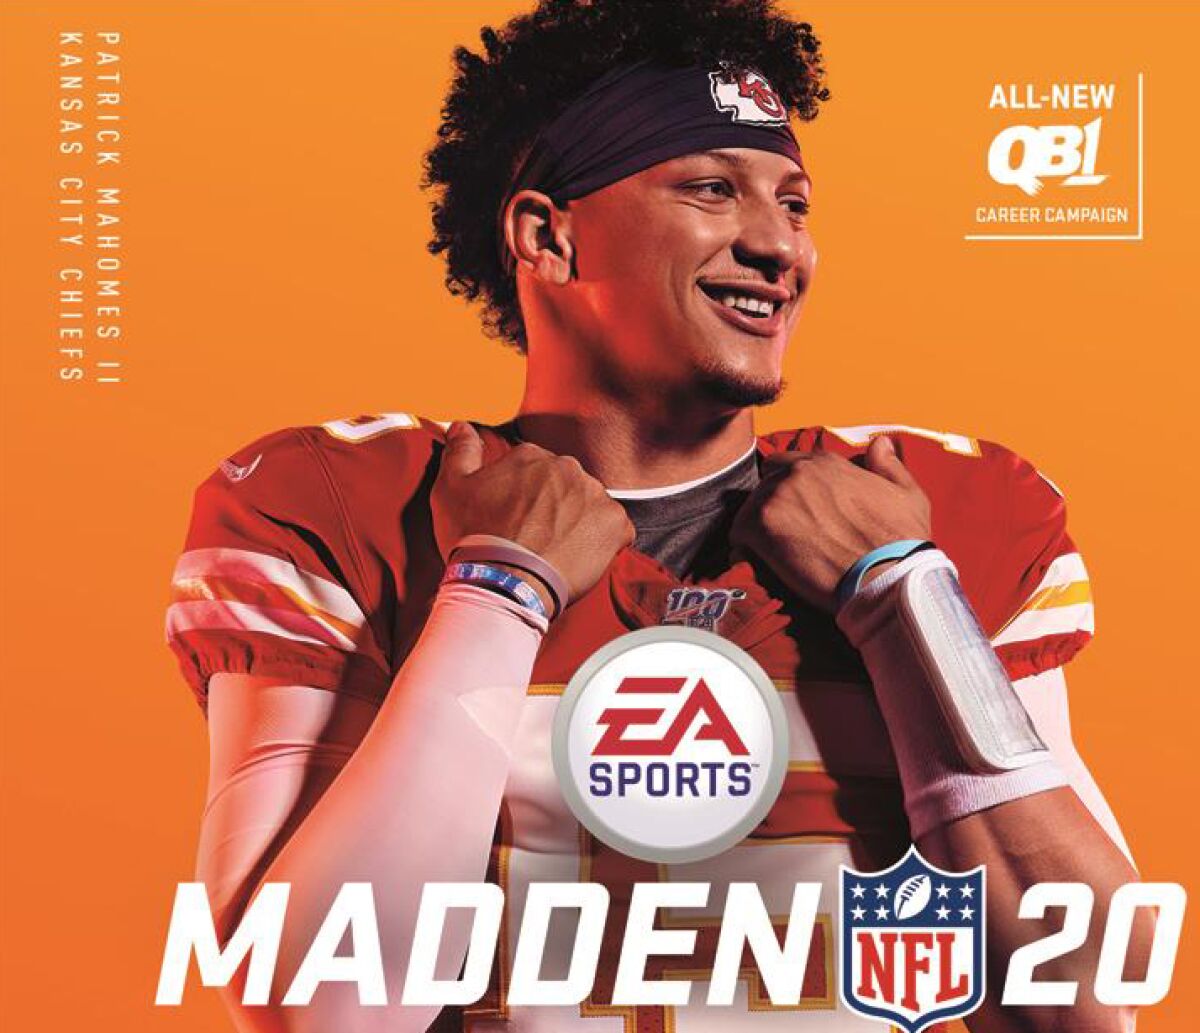 Kansas City Chiefs quarterback Patrick Mahomes appears on the cover of the "Madden NFL 20" video game.